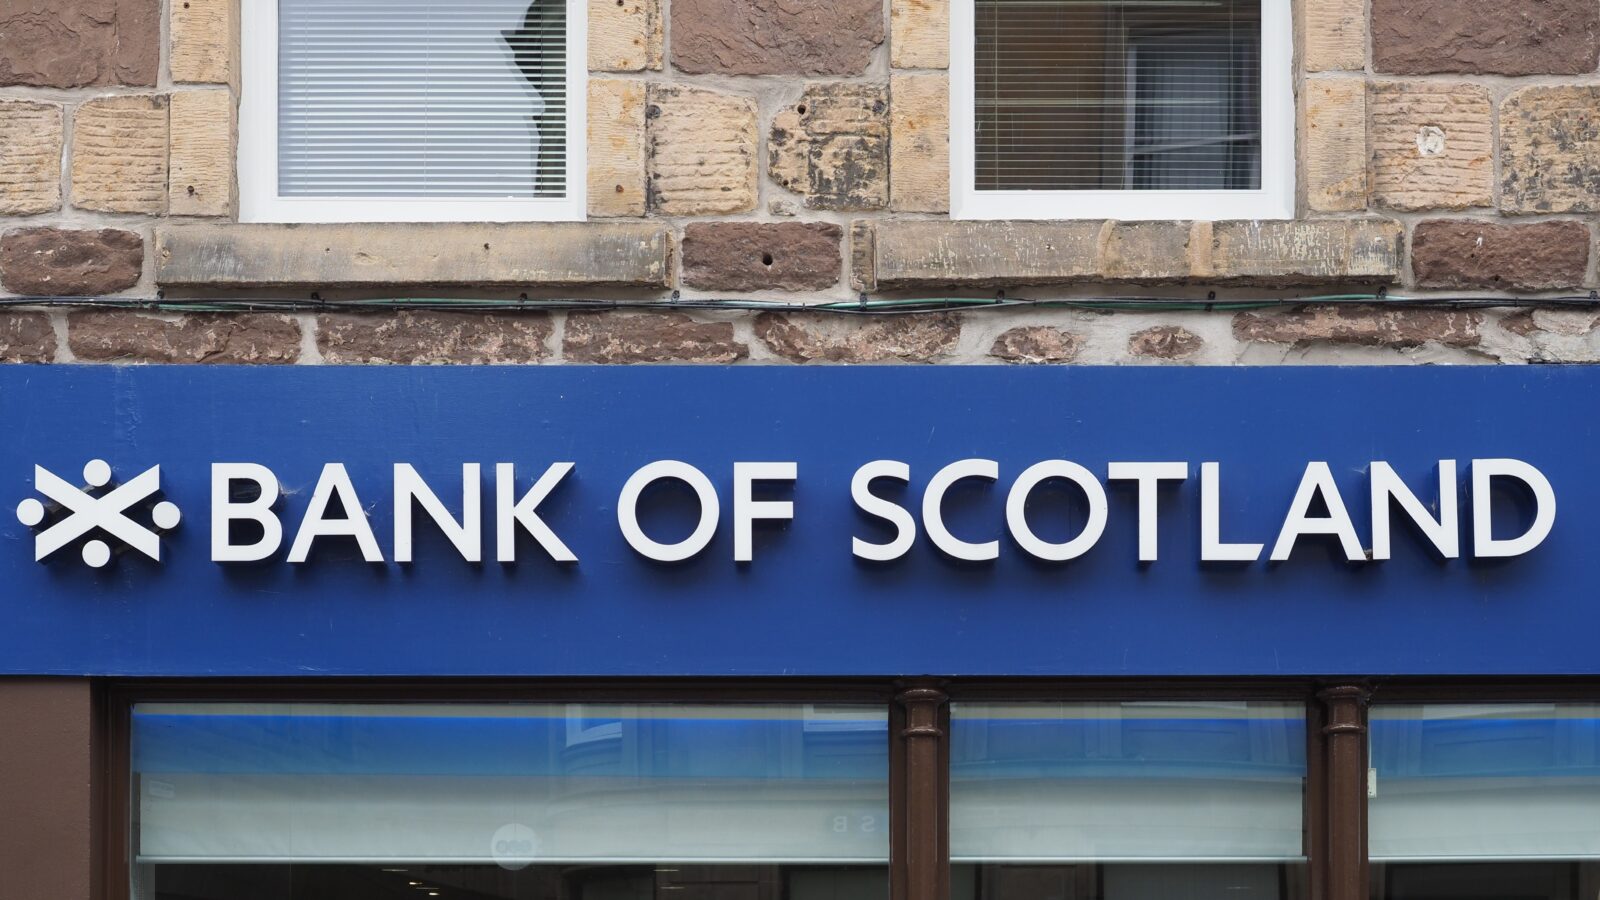 Mobile bank branch closures to affect 13 Aberdeenshire towns